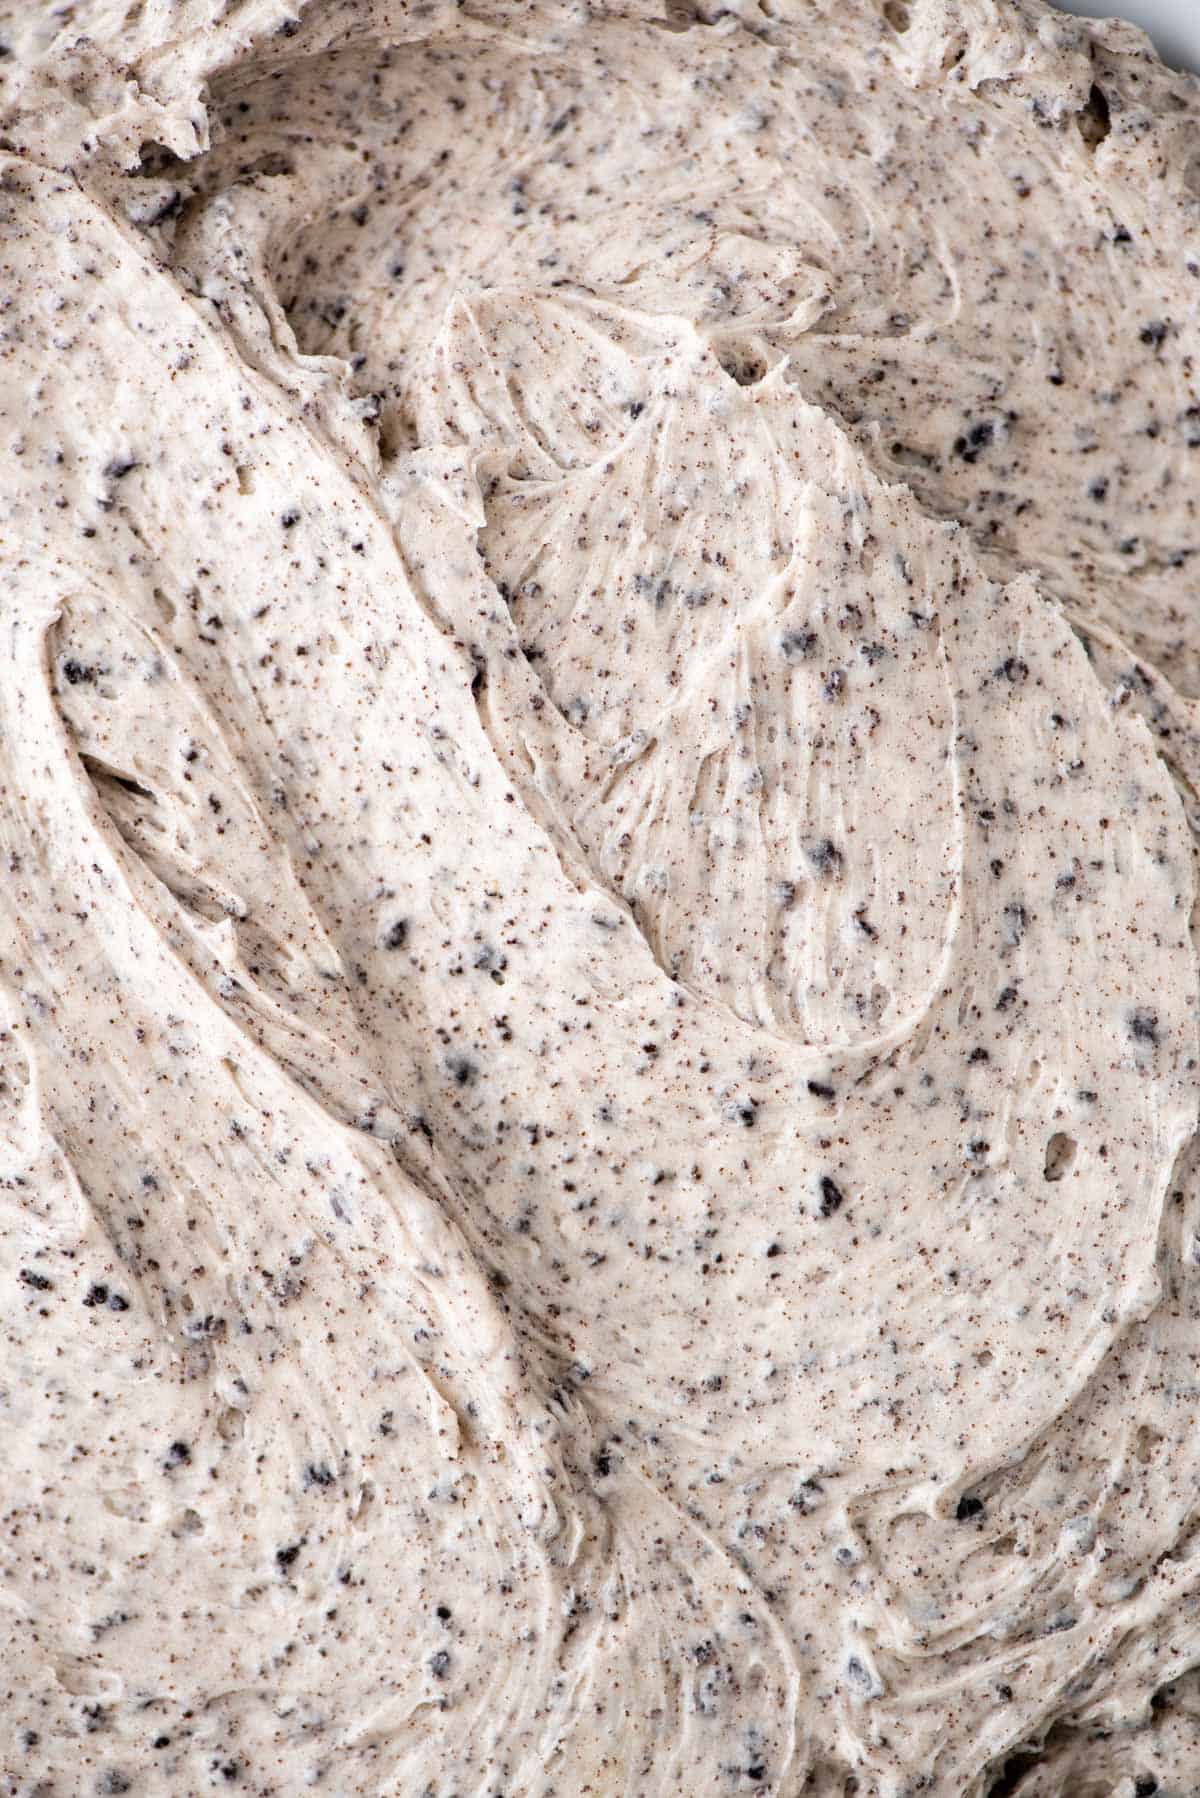 Closeup of Oreo frosting to show texture